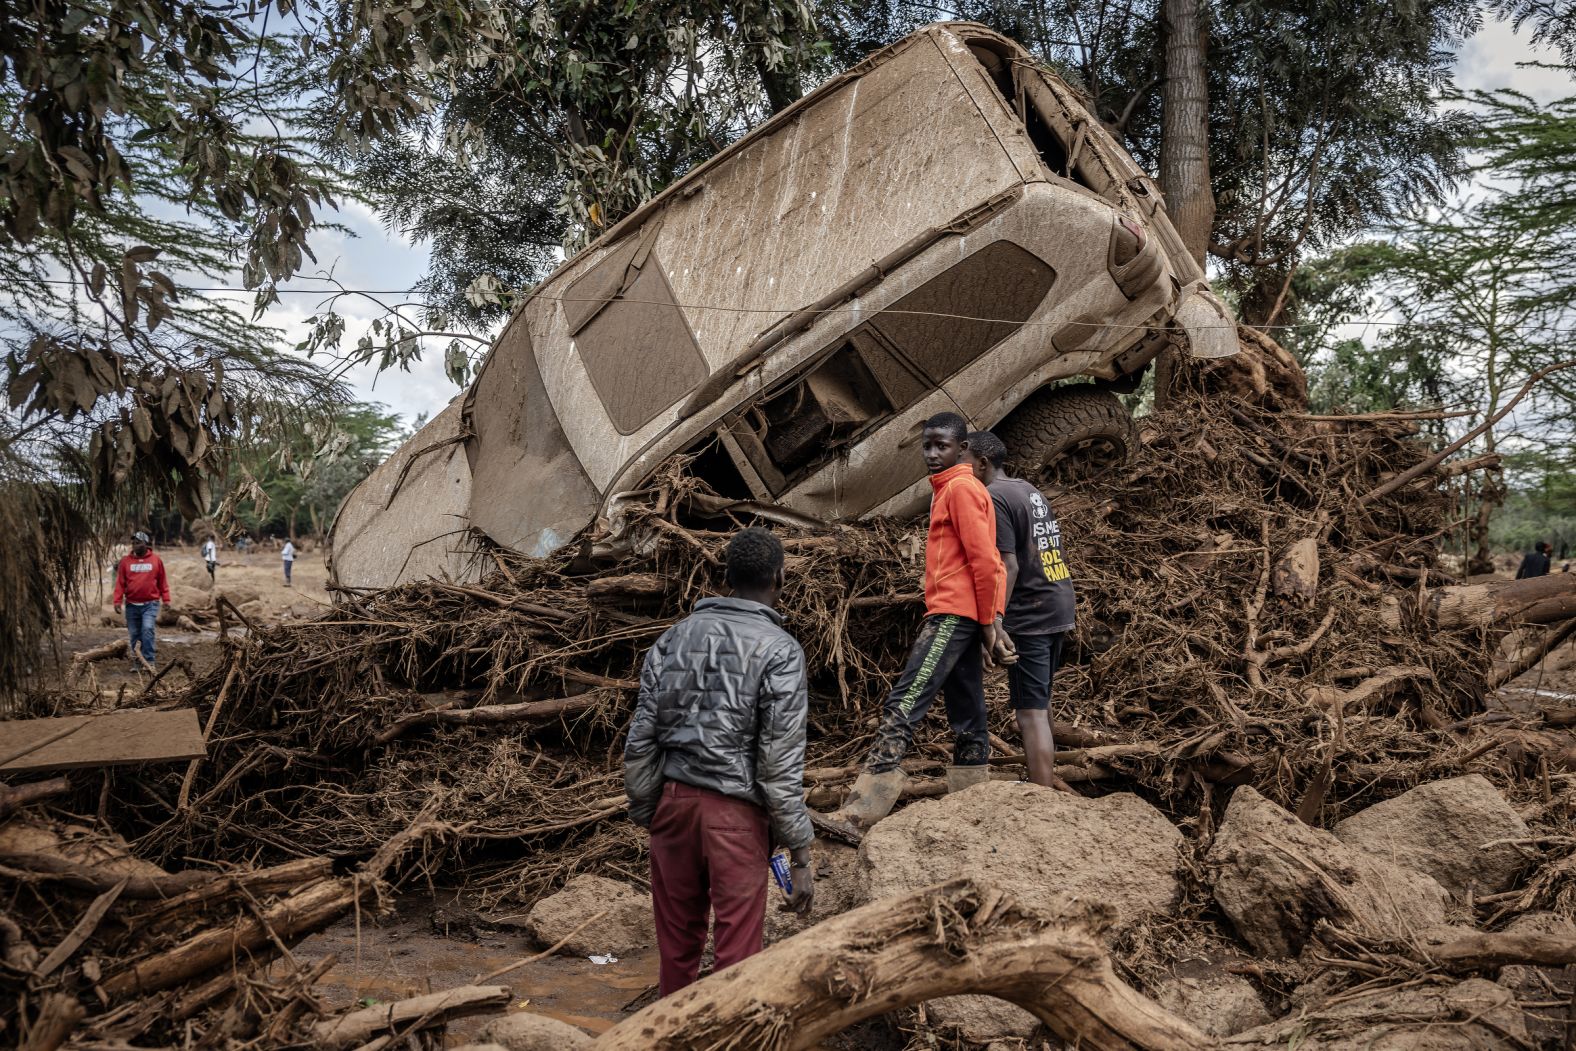 Young men inspect a vehicle that was damaged by floods in the Kenyan village of Kamuchiri on Monday, April 29. River Talek, one of the tributaries of the Mara River, burst its banks and swept through more than a dozen riverside tourist lodges and camps. At least 188 people were killed in the <a href="index.php?page=&url=https%3A%2F%2Fwww.cnn.com%2F2024%2F05%2F02%2Fafrica%2Fkenya-flooding-maasai-mara-intl%2Findex.html" target="_blank">catastrophic flooding</a>.